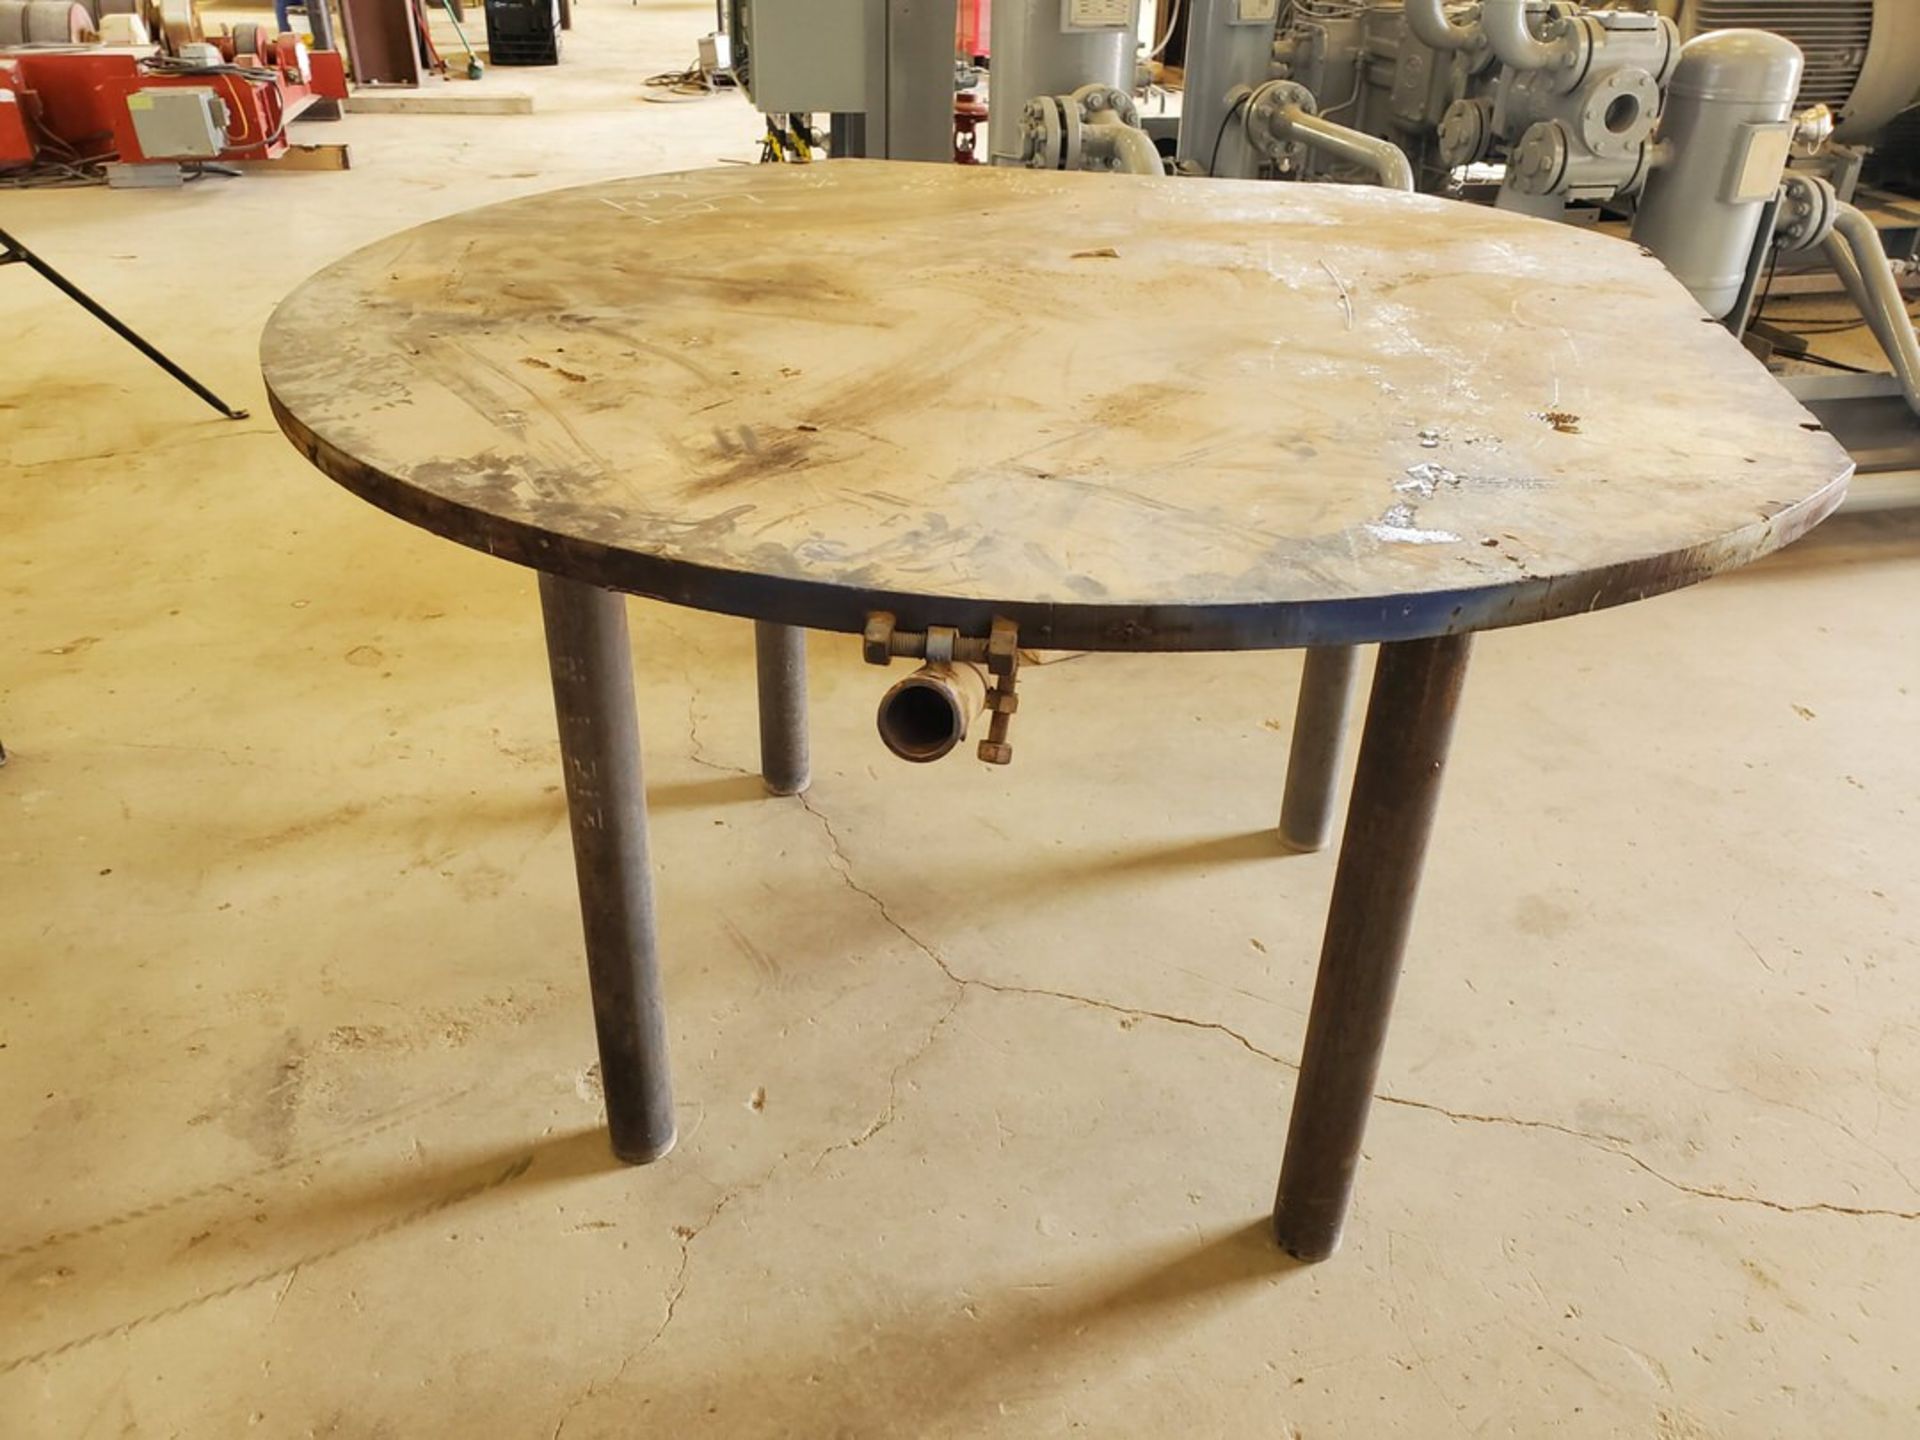 Stl Table 72"Dia x 40"H - Image 2 of 3